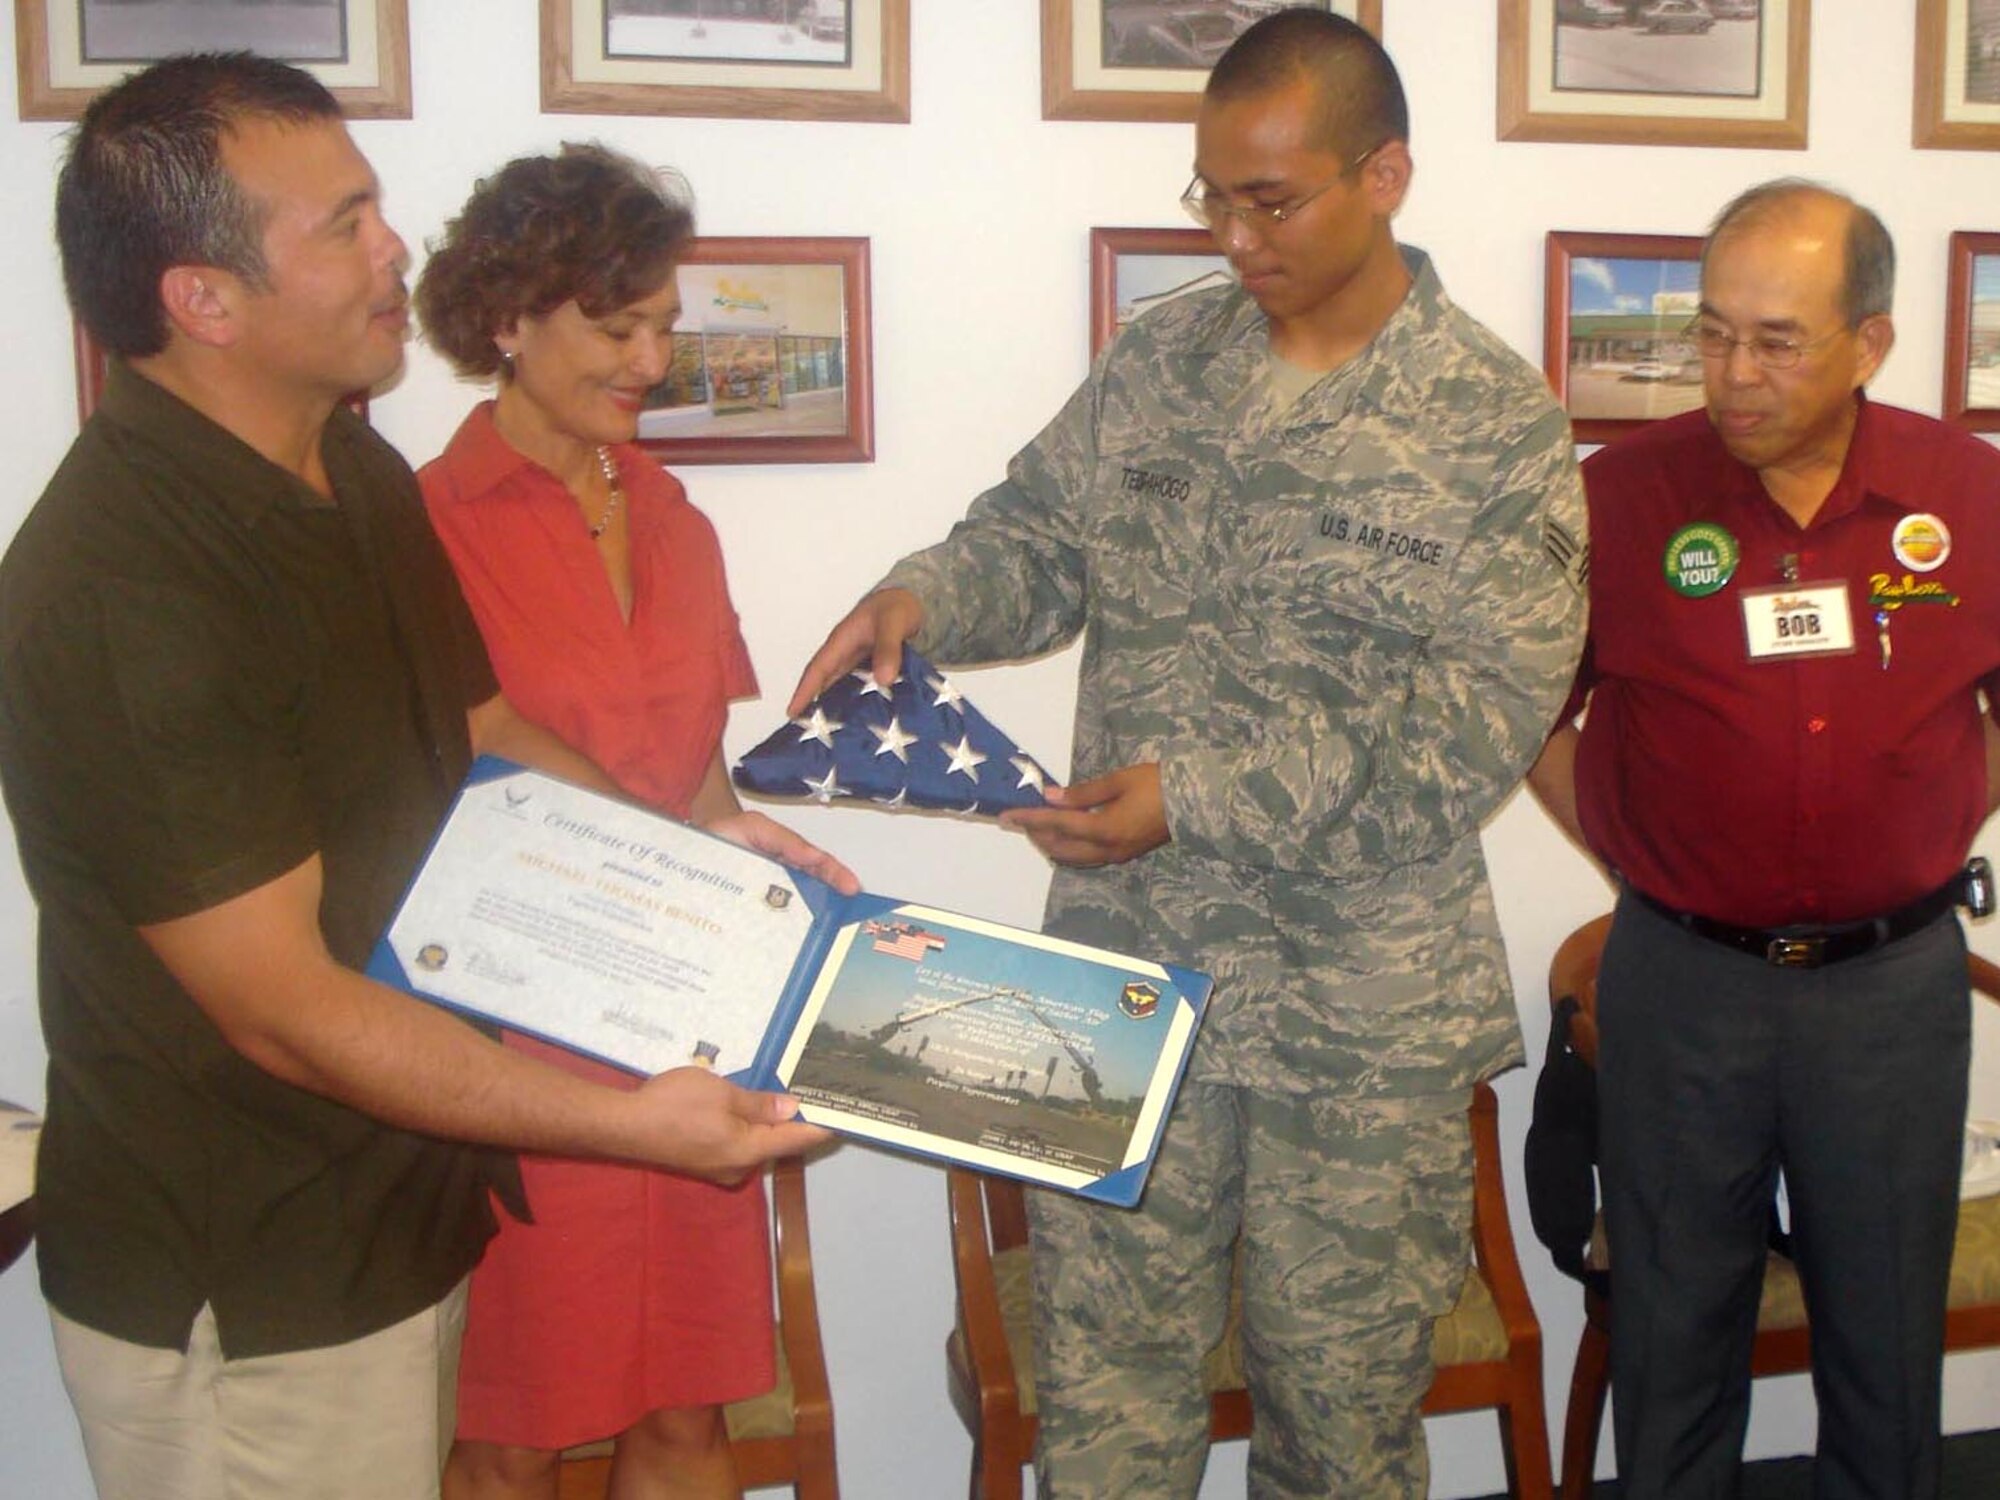 In appreciation for employer support during his recent deployement, Senior Airman Benjamin Tedpahogo, 44th Aerial Port Squadron, Andersen Air Force Base, Guam, presents an American flag flown over Iraq with certificate to Michael Benito and Kathy Sgro, Payless Supermarkets general managers, July 3, 2008. While deployed to Sather Air Base, Iraq, Airman Tedpahago received received care packages from his fellow employees at Payless Supermarkets which he shared with the rest of the 44th APS team members stationed with him in the desert. The 44th APS is part of the 624th Regional Support Group, headquartered at Hickam Air Force Base, Hawaii.